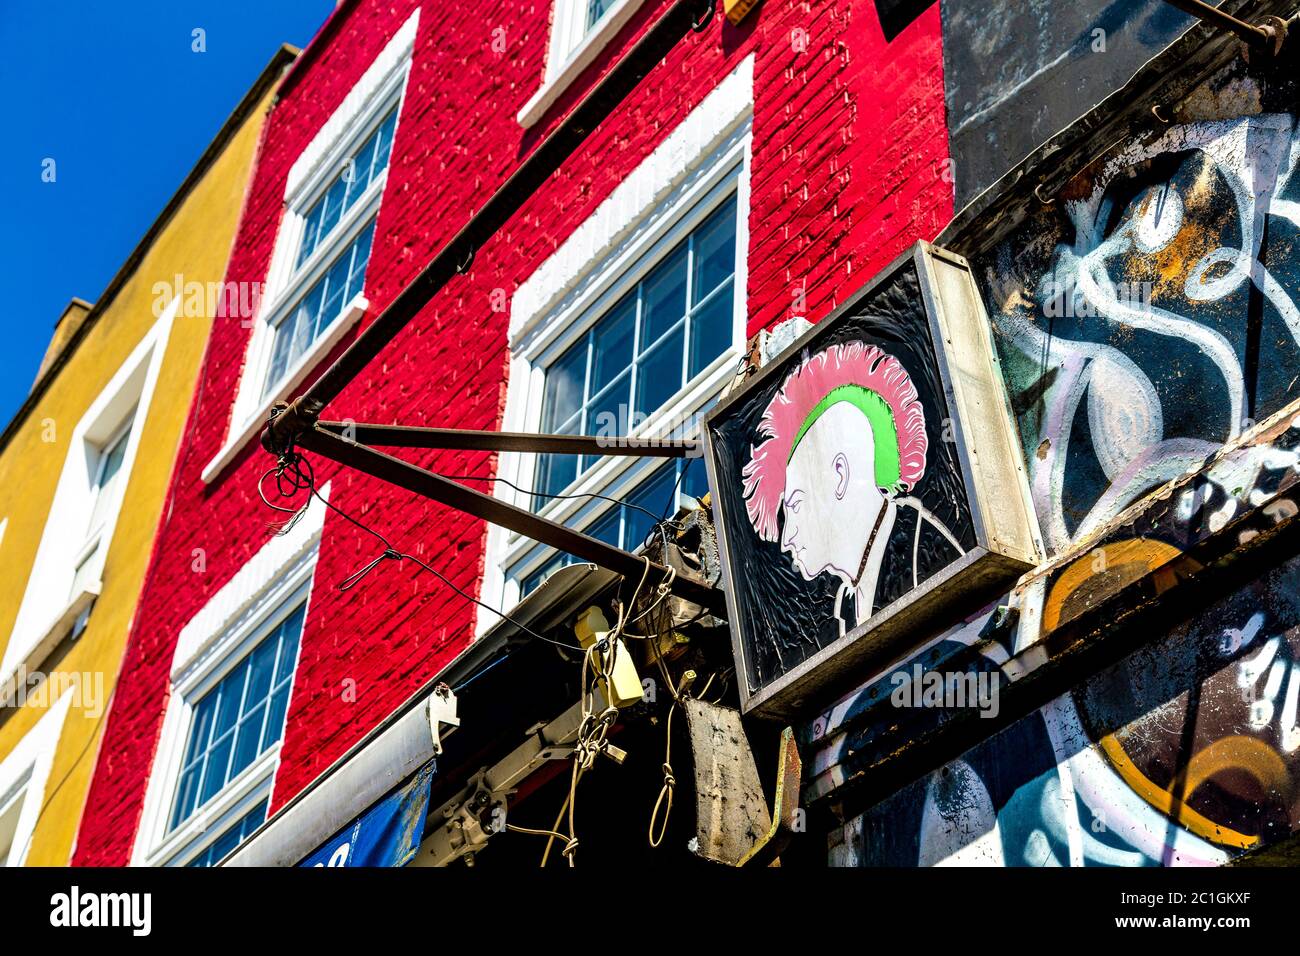 A sign with a punk searing a mohawk and colourful facades of houses along Camden High Street, London, UK Stock Photo